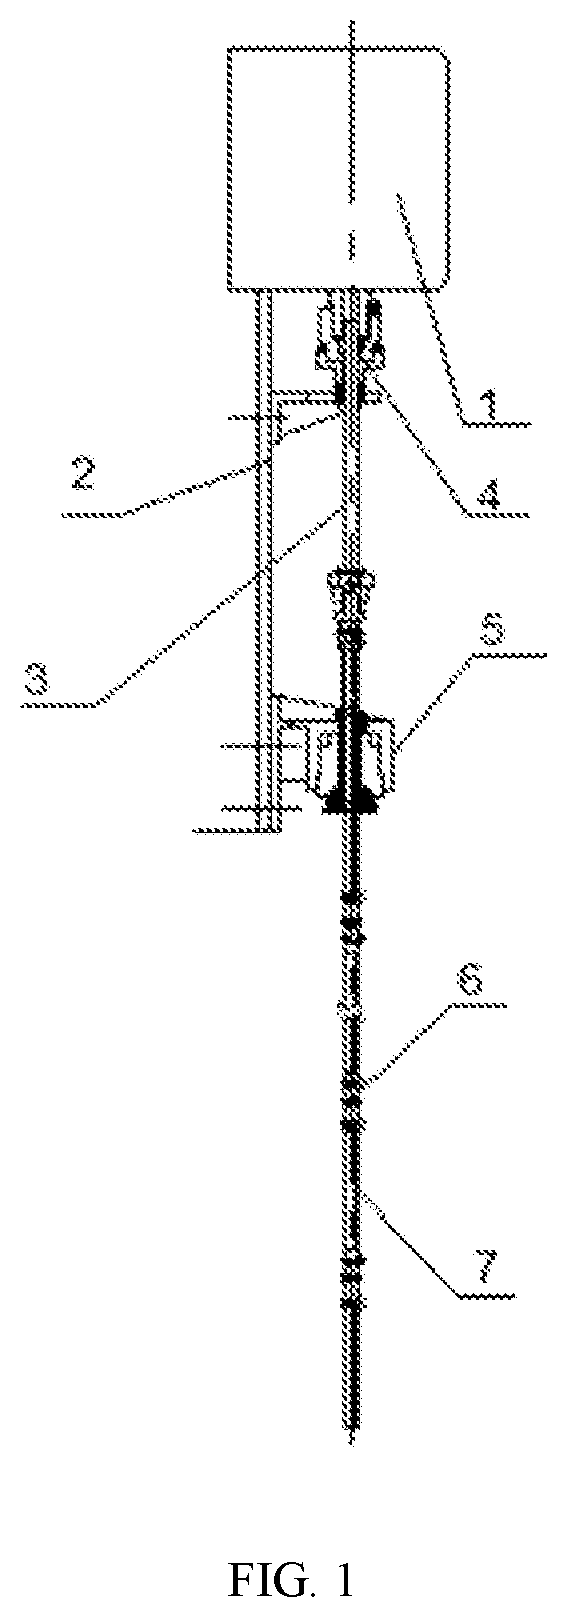 Fracturing device for extraction of coalbed methane in low permeability reservoir